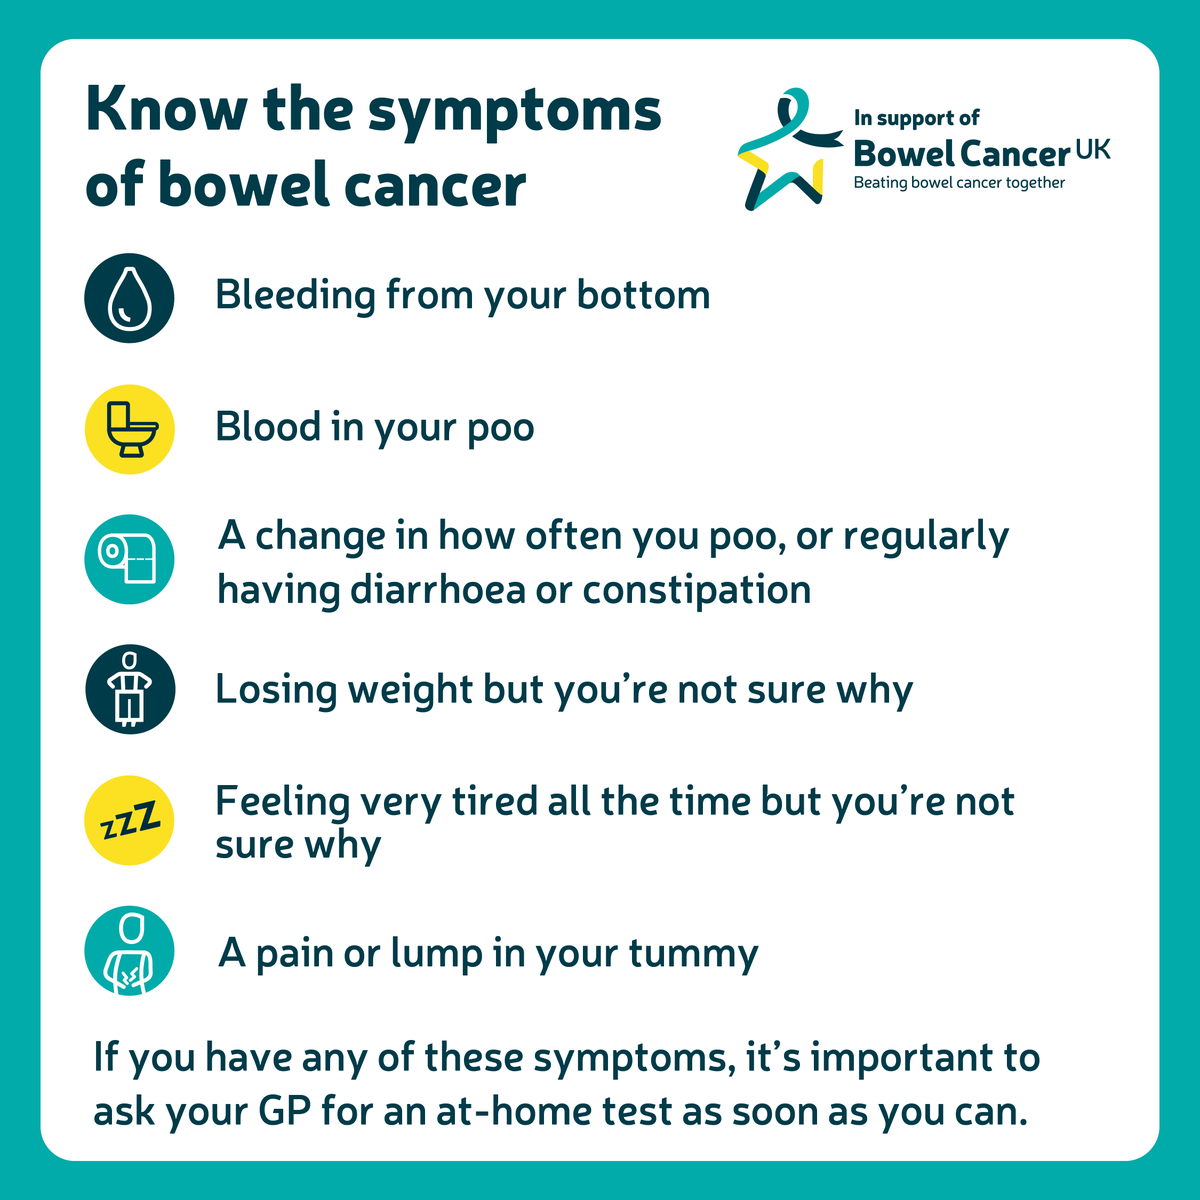 This #BowelCancerAwarenessMonth, @bowelcanceruk want you to know this #OneThing – the earlier bowel cancer is spotted, the more treatable it’s likely to be. Learn more: bowelcanceruk.org.uk/about-bowel-ca…